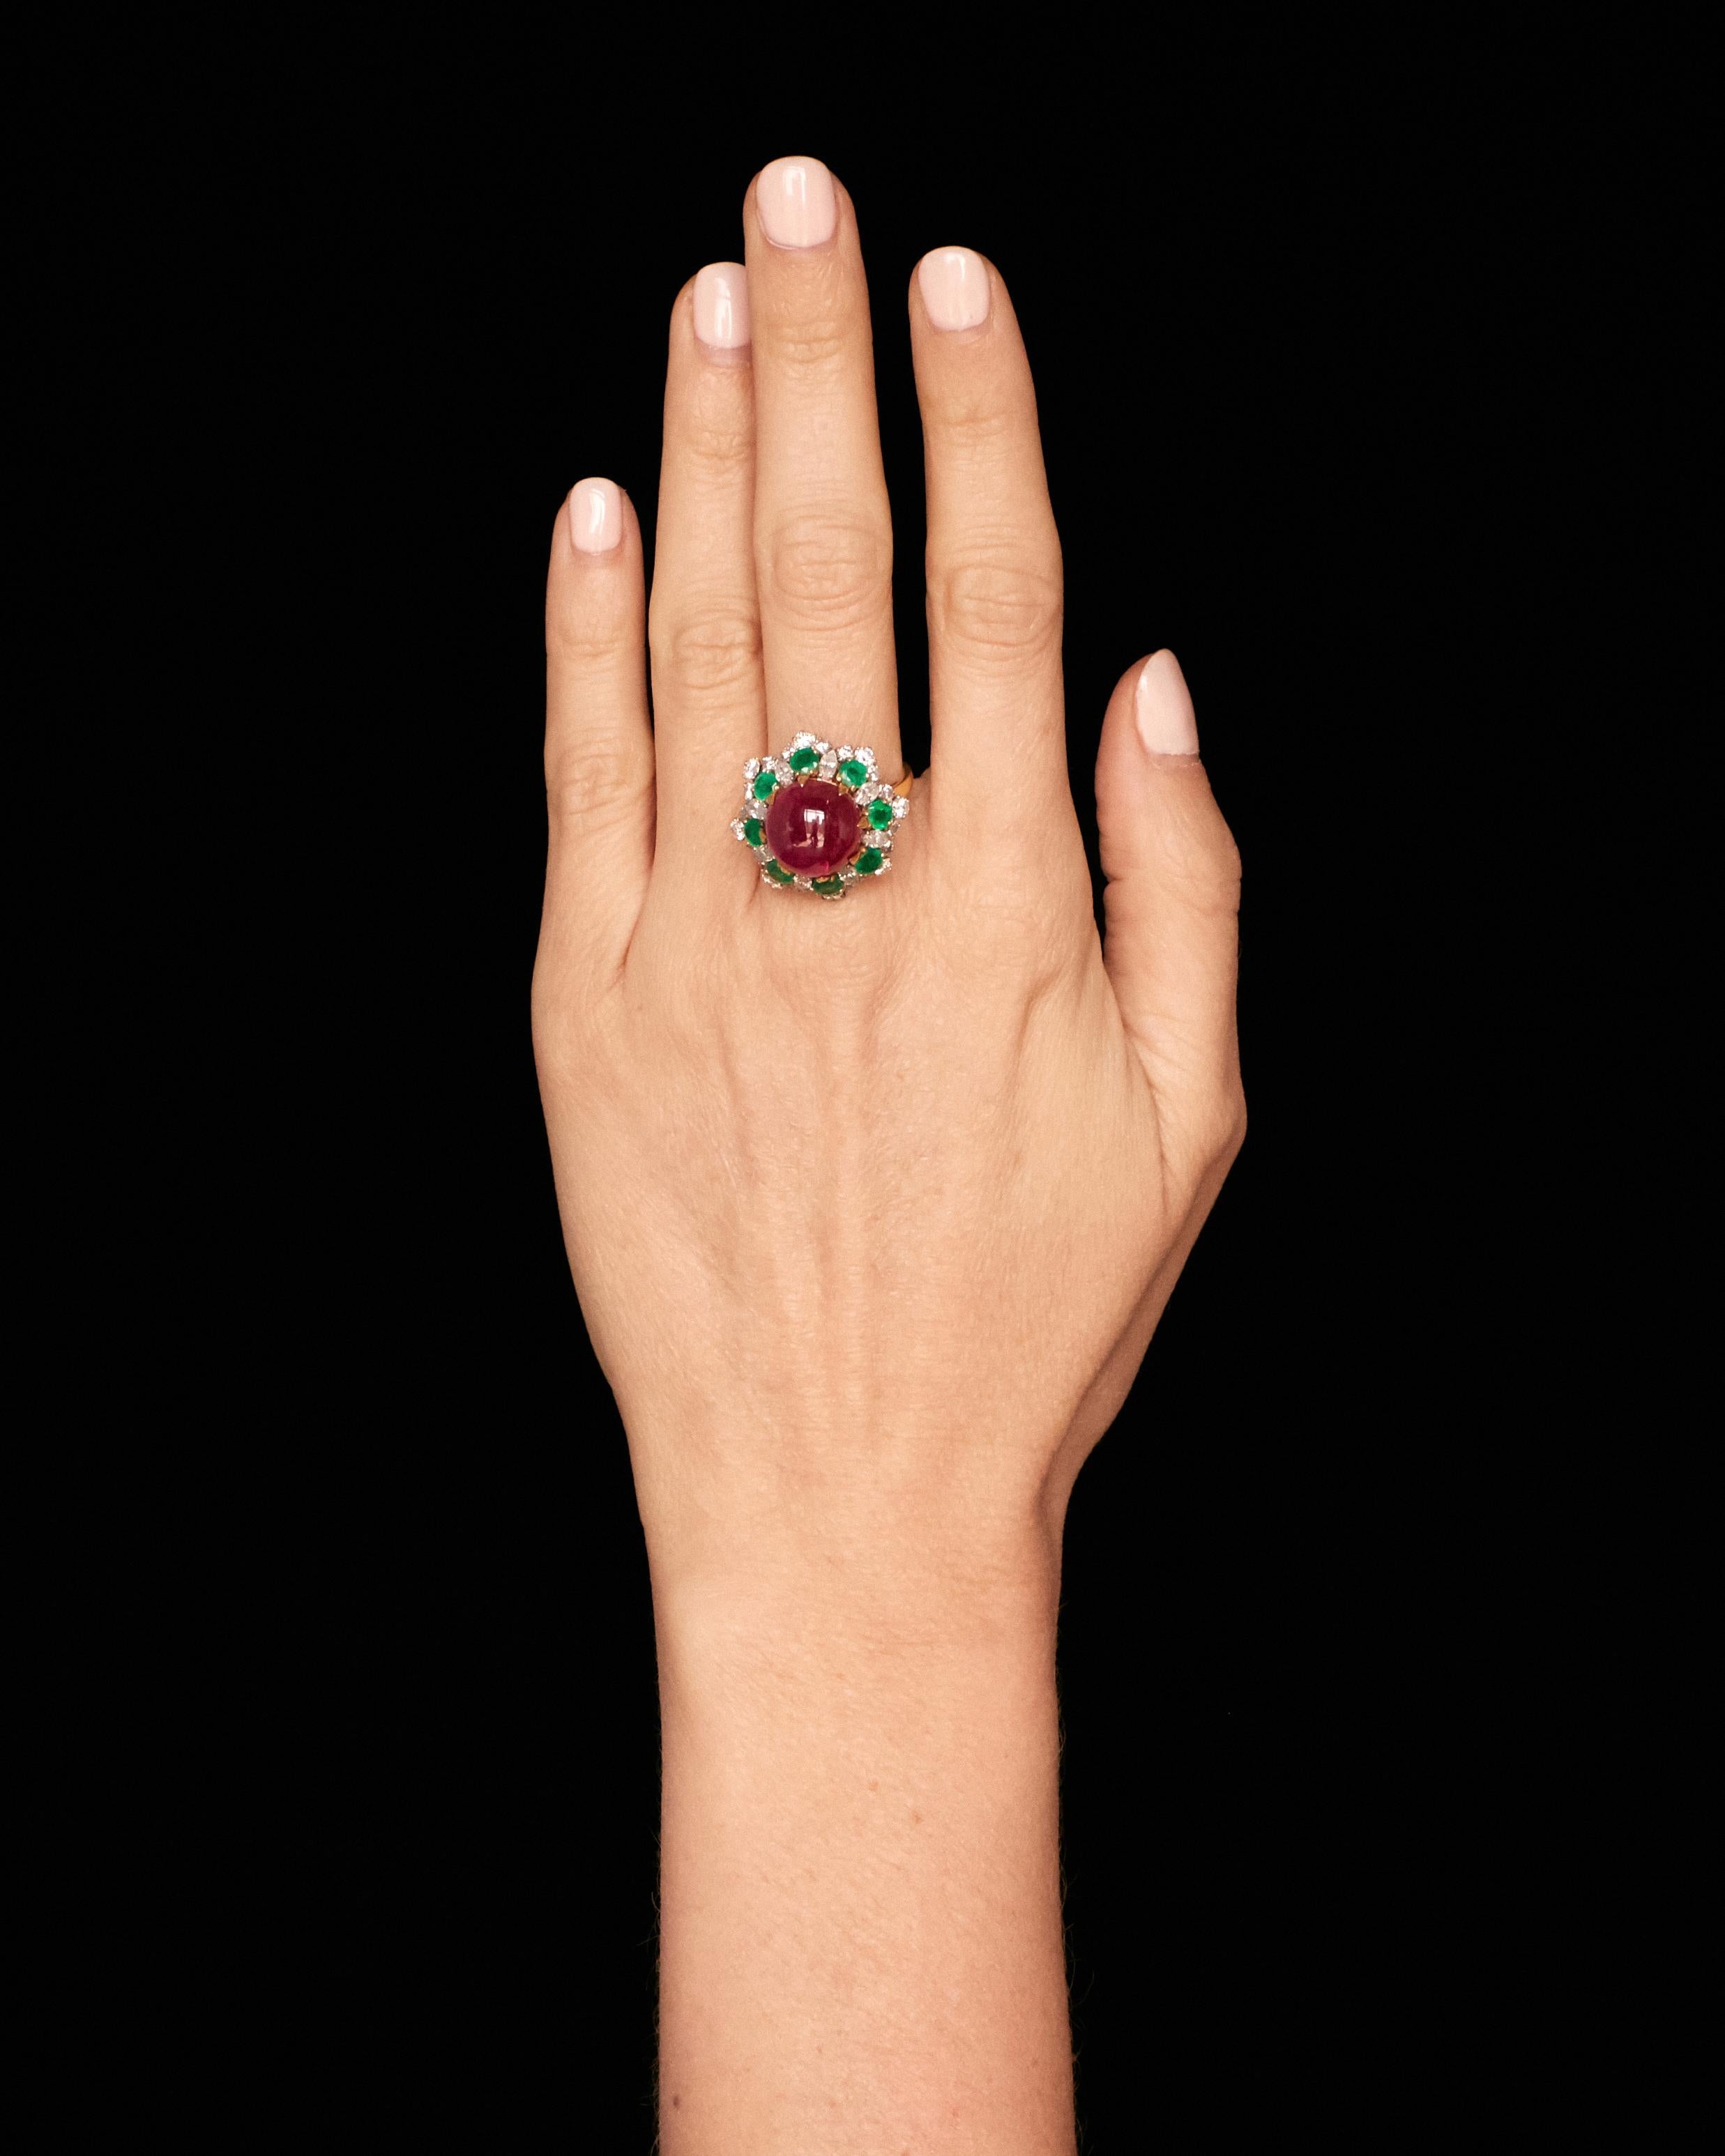 An iconic Dolce Vita ring presenting a cabochon ruby weighing approximately 10cts, highlighted by emeralds (appr. 2 cts) and diamonds (app.  2 cts), mounted on 18kt yellow gold. Made in Italy by Bulgari, circa 1965.